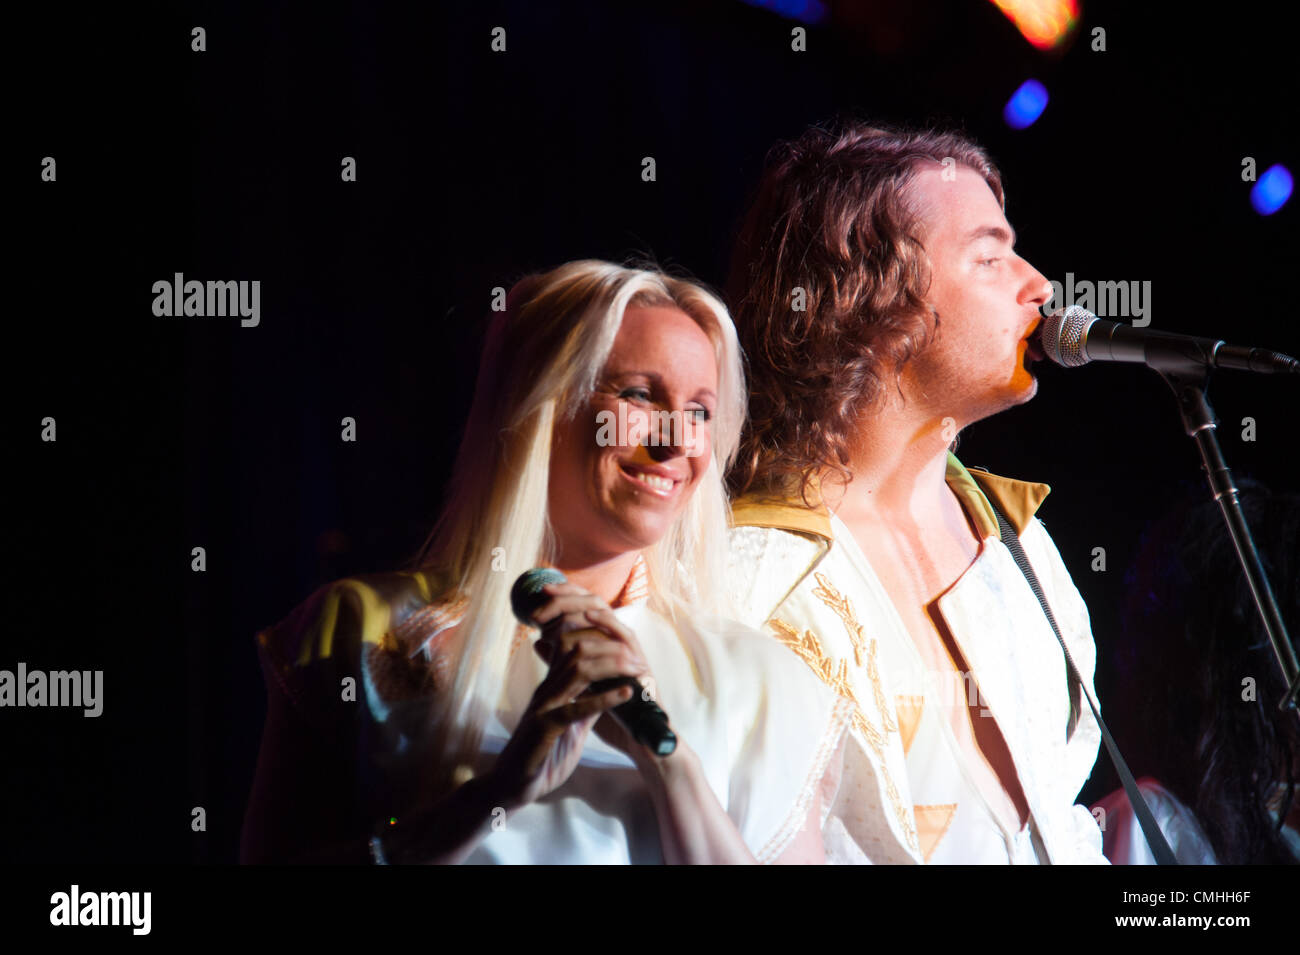 LINCOLN, CA – August 10: Abba - Arrival From Sweden performs at Thunder Valley Casino Resort in Lincoln, California on August 10, 2012 Stock Photo